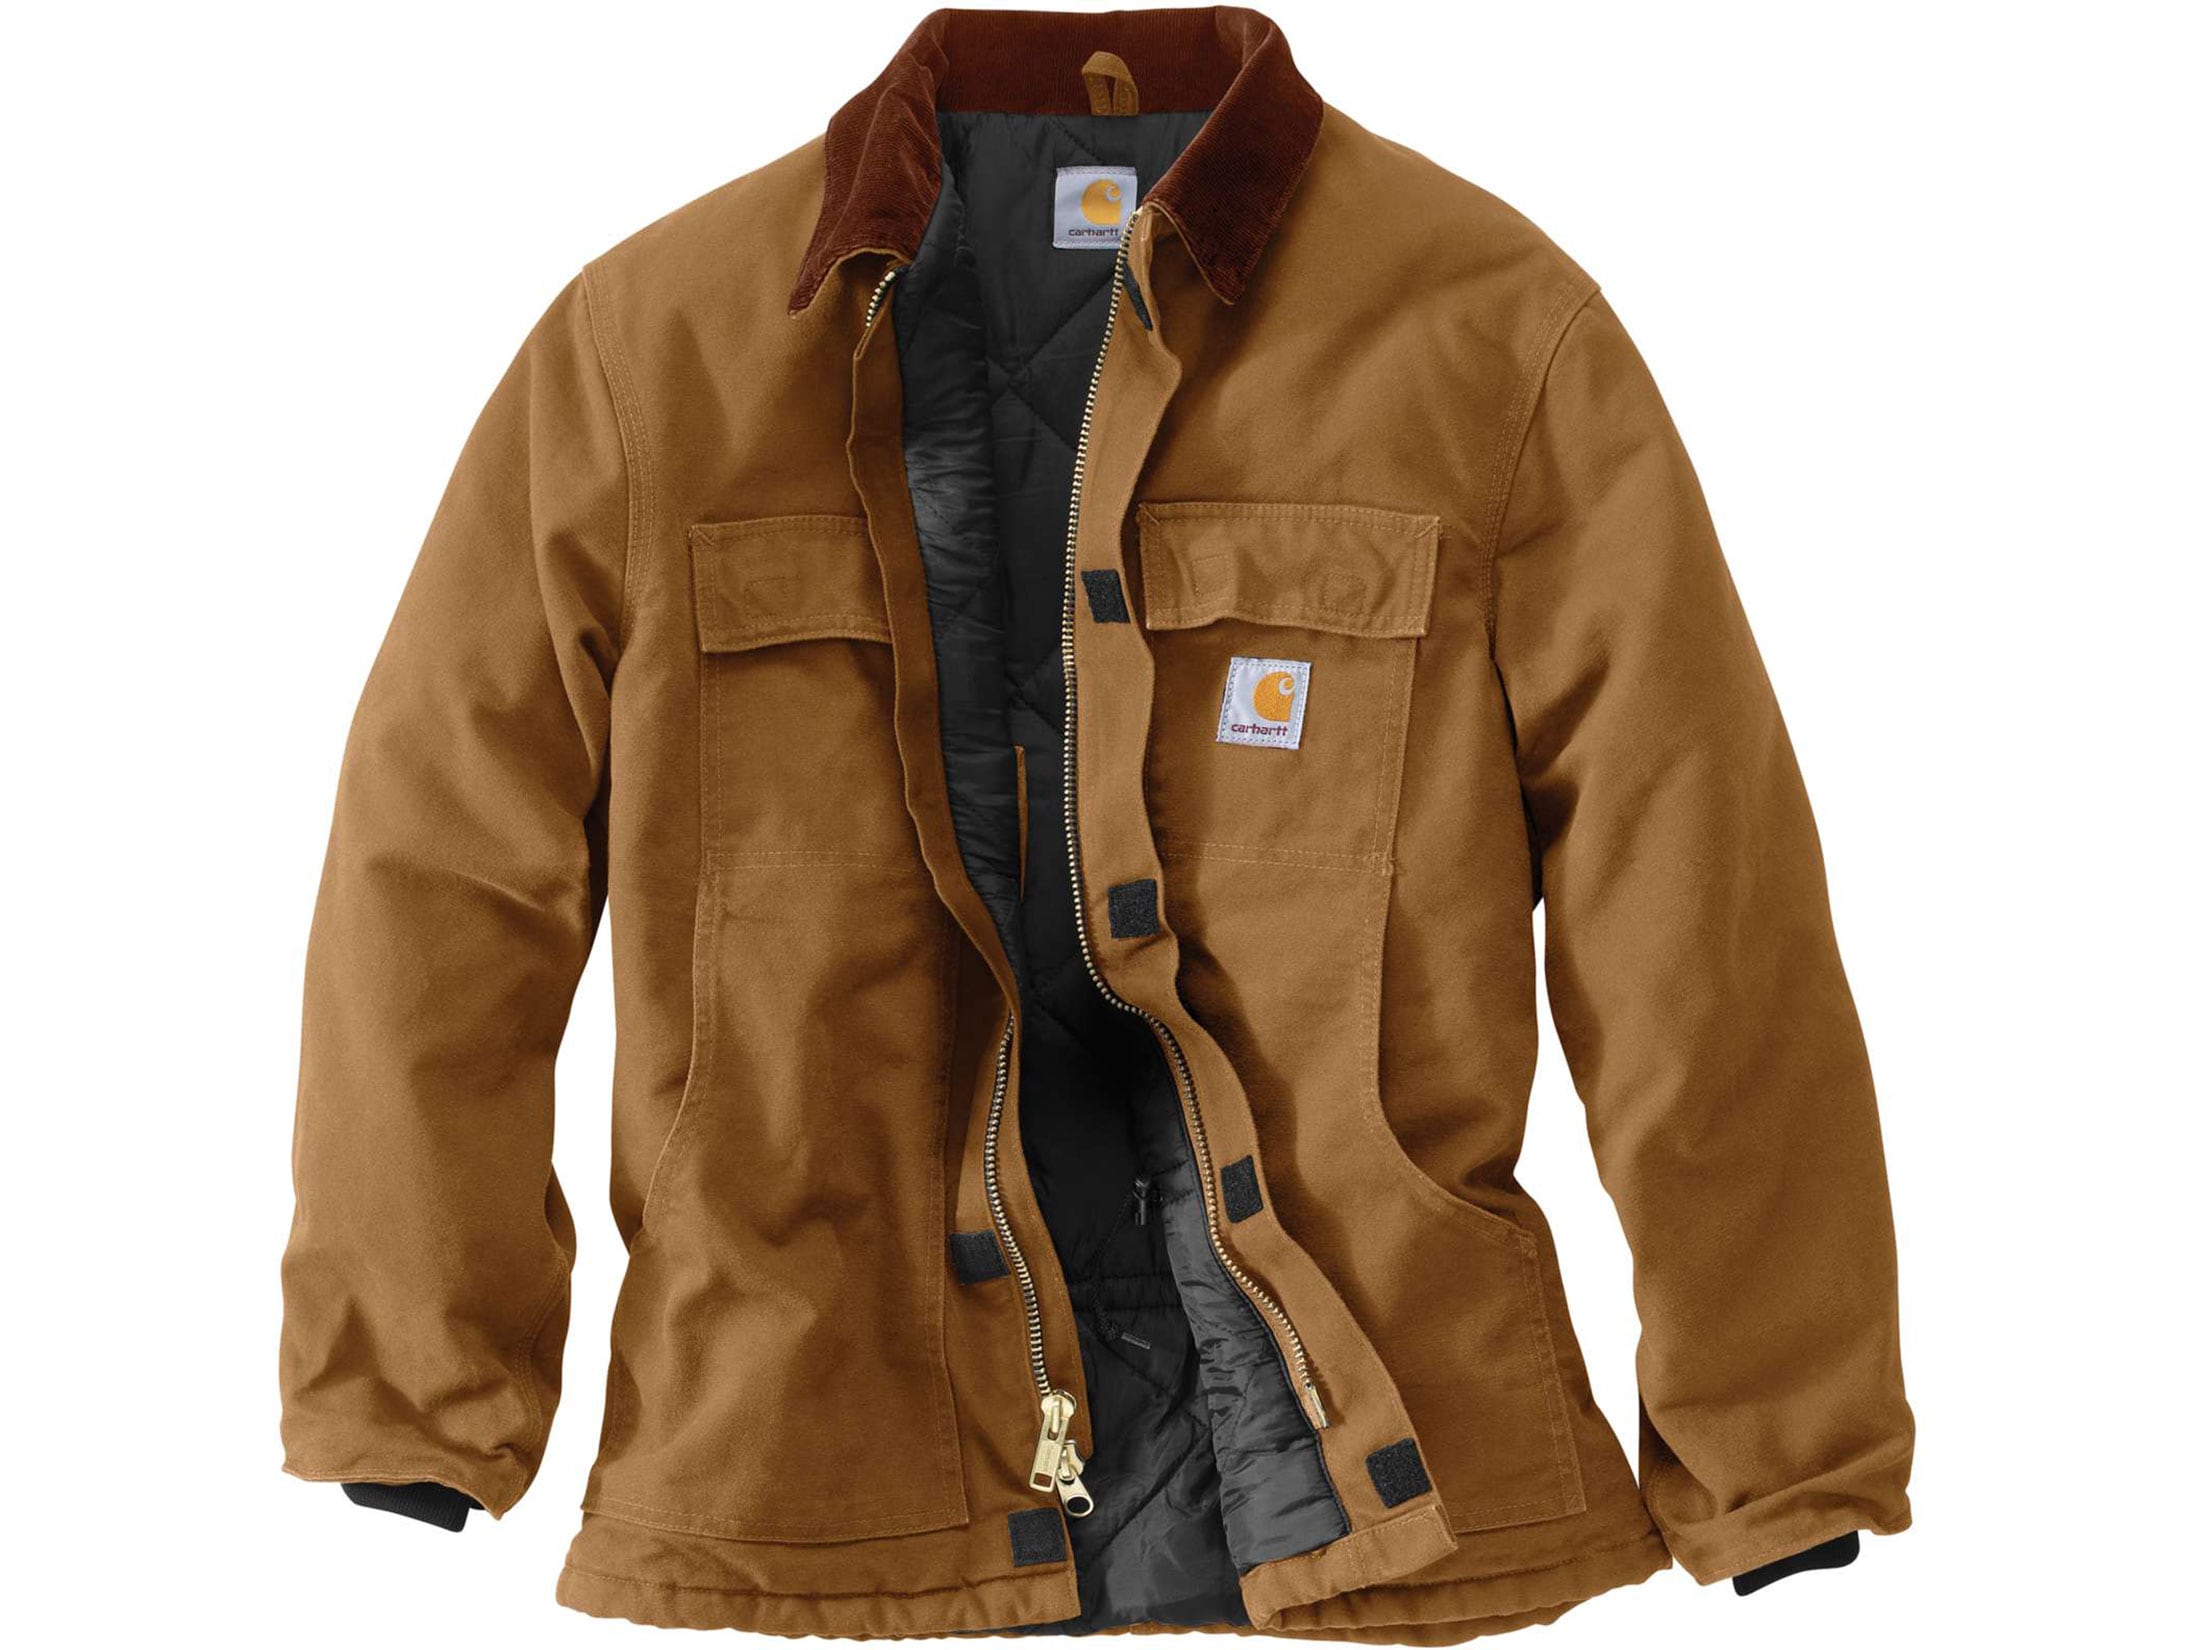 Carhartt Loose Fit Washed Duck Insulated Coat